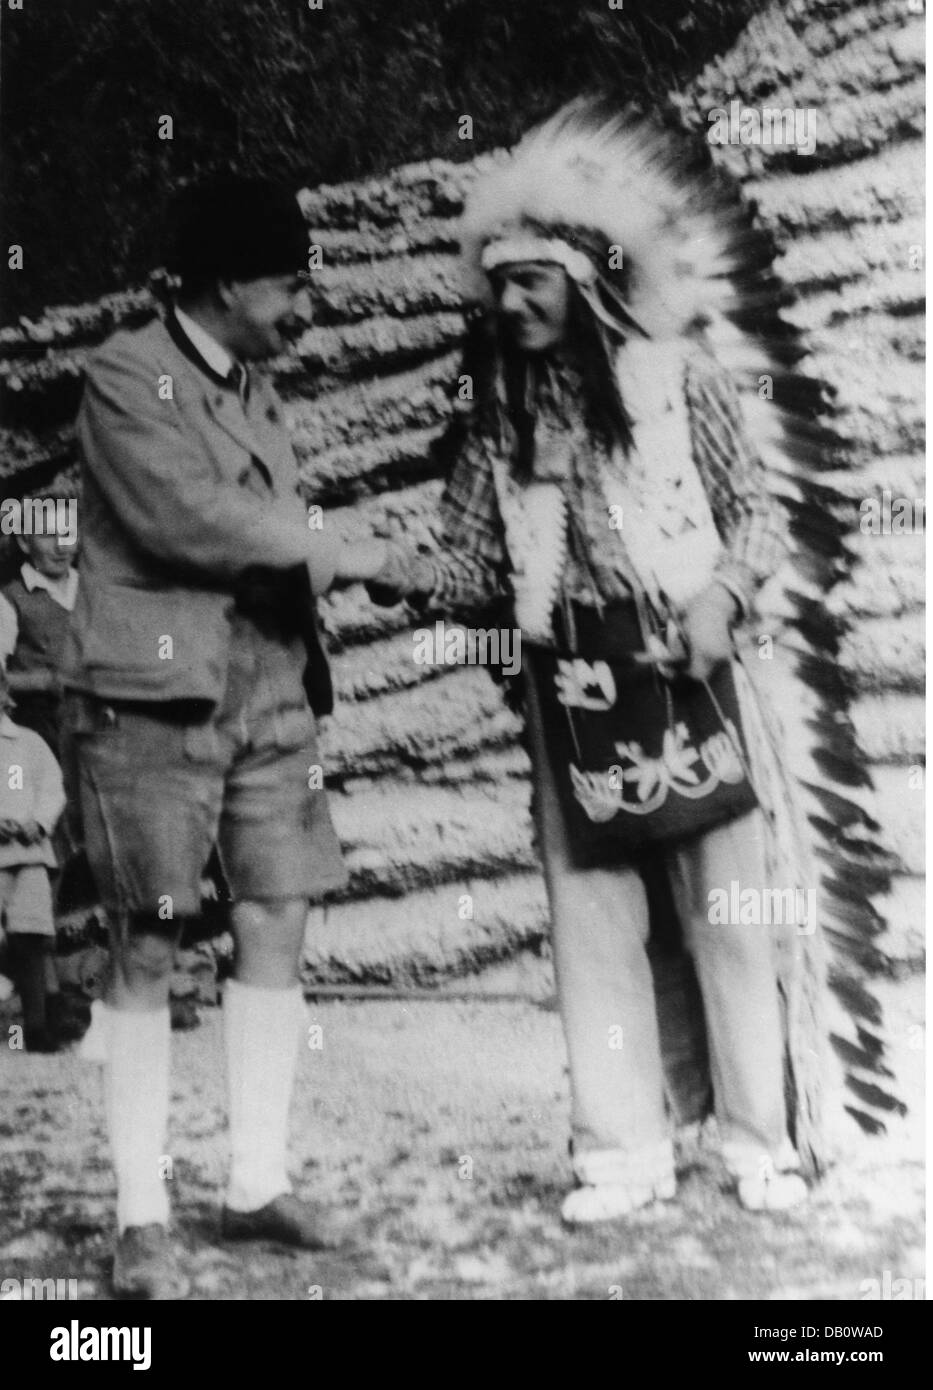 leisure, western cultural association, Red Indian having conversation with Heinz Heck, director of the Hellabrunn zoo, Munich, 1930s, Additional-Rights-Clearences-Not Available Stock Photo